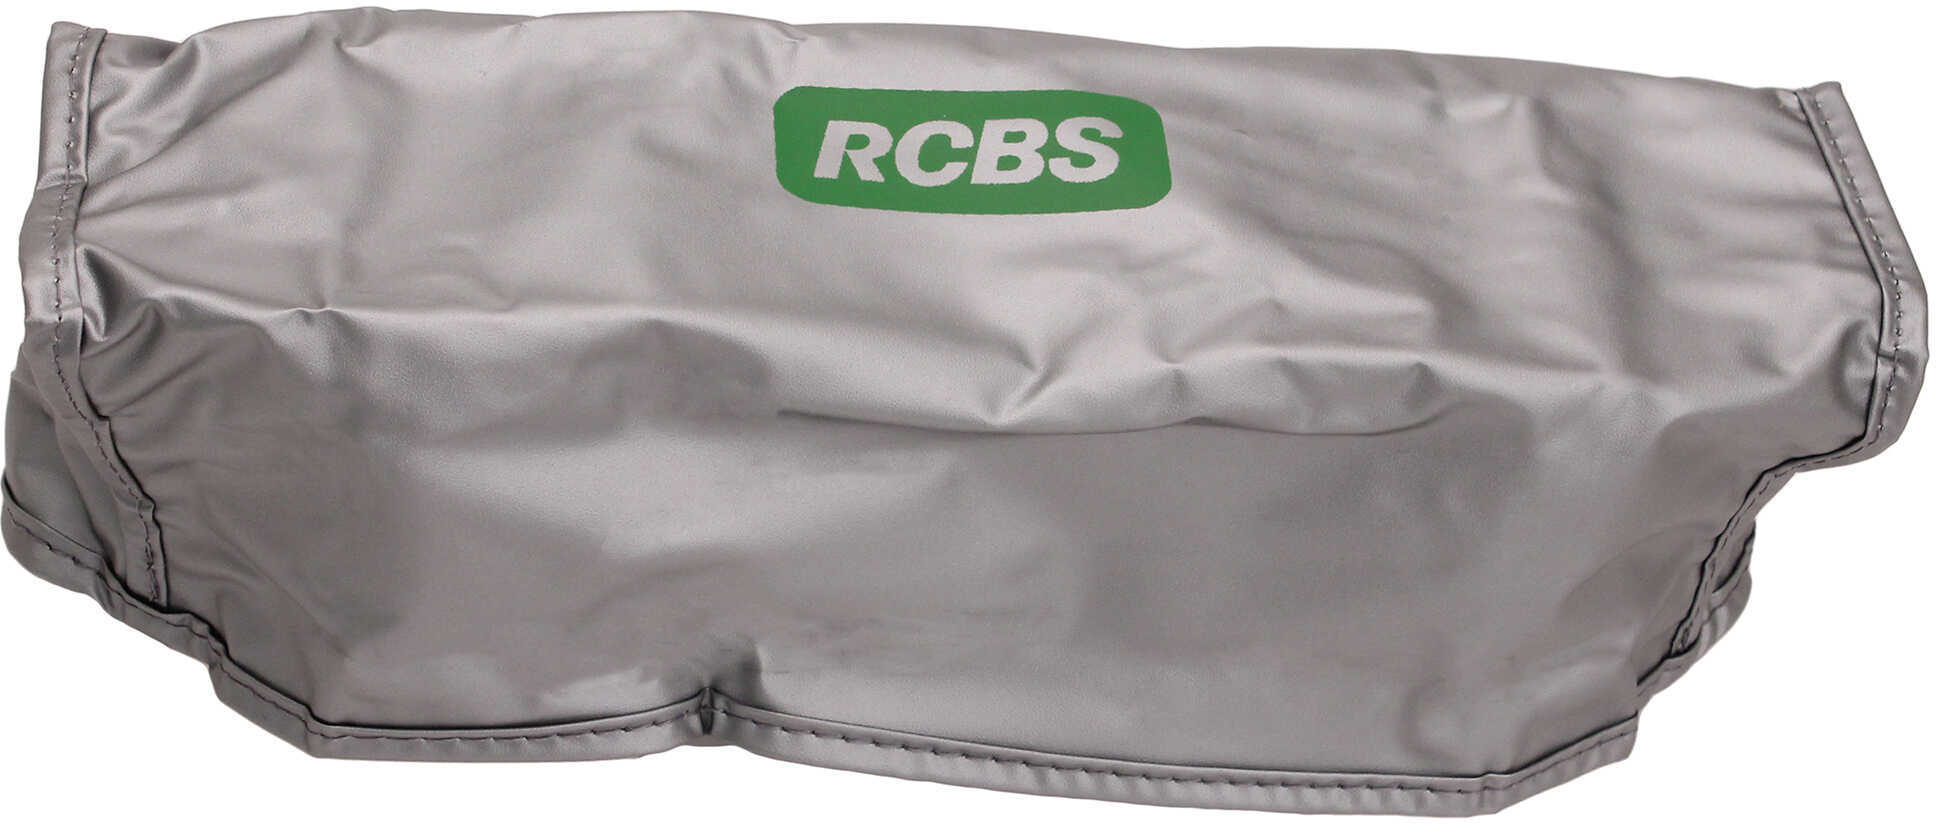 RCBS Cover For Scale 502 505 510 09075